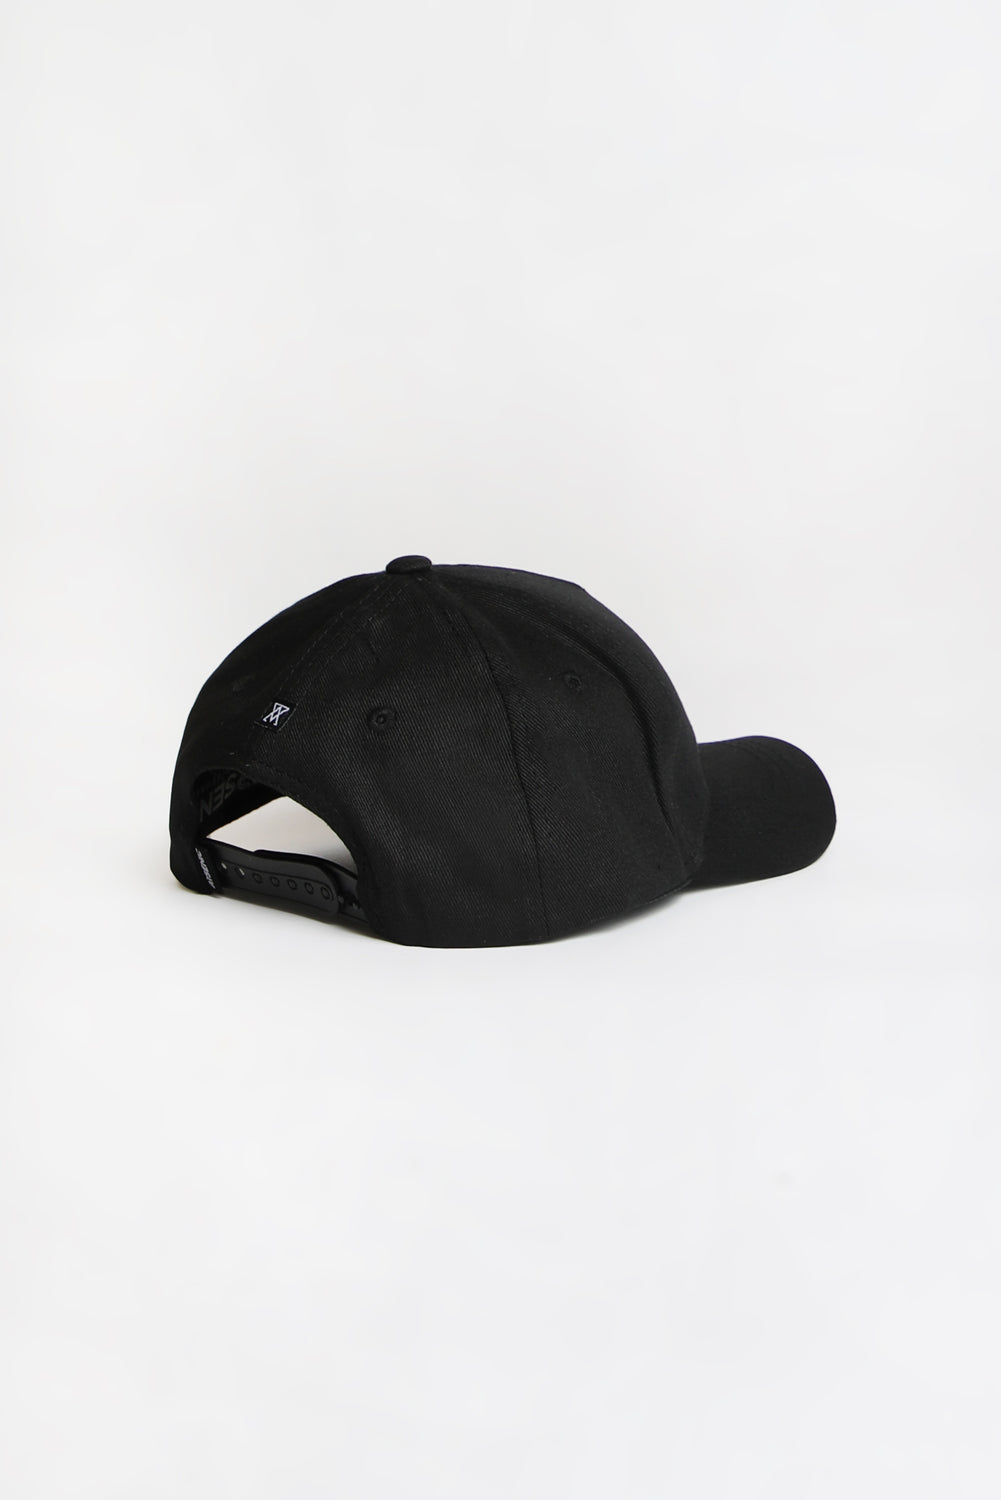 Arsenic Youth Duck Patch Baseball Hat Black